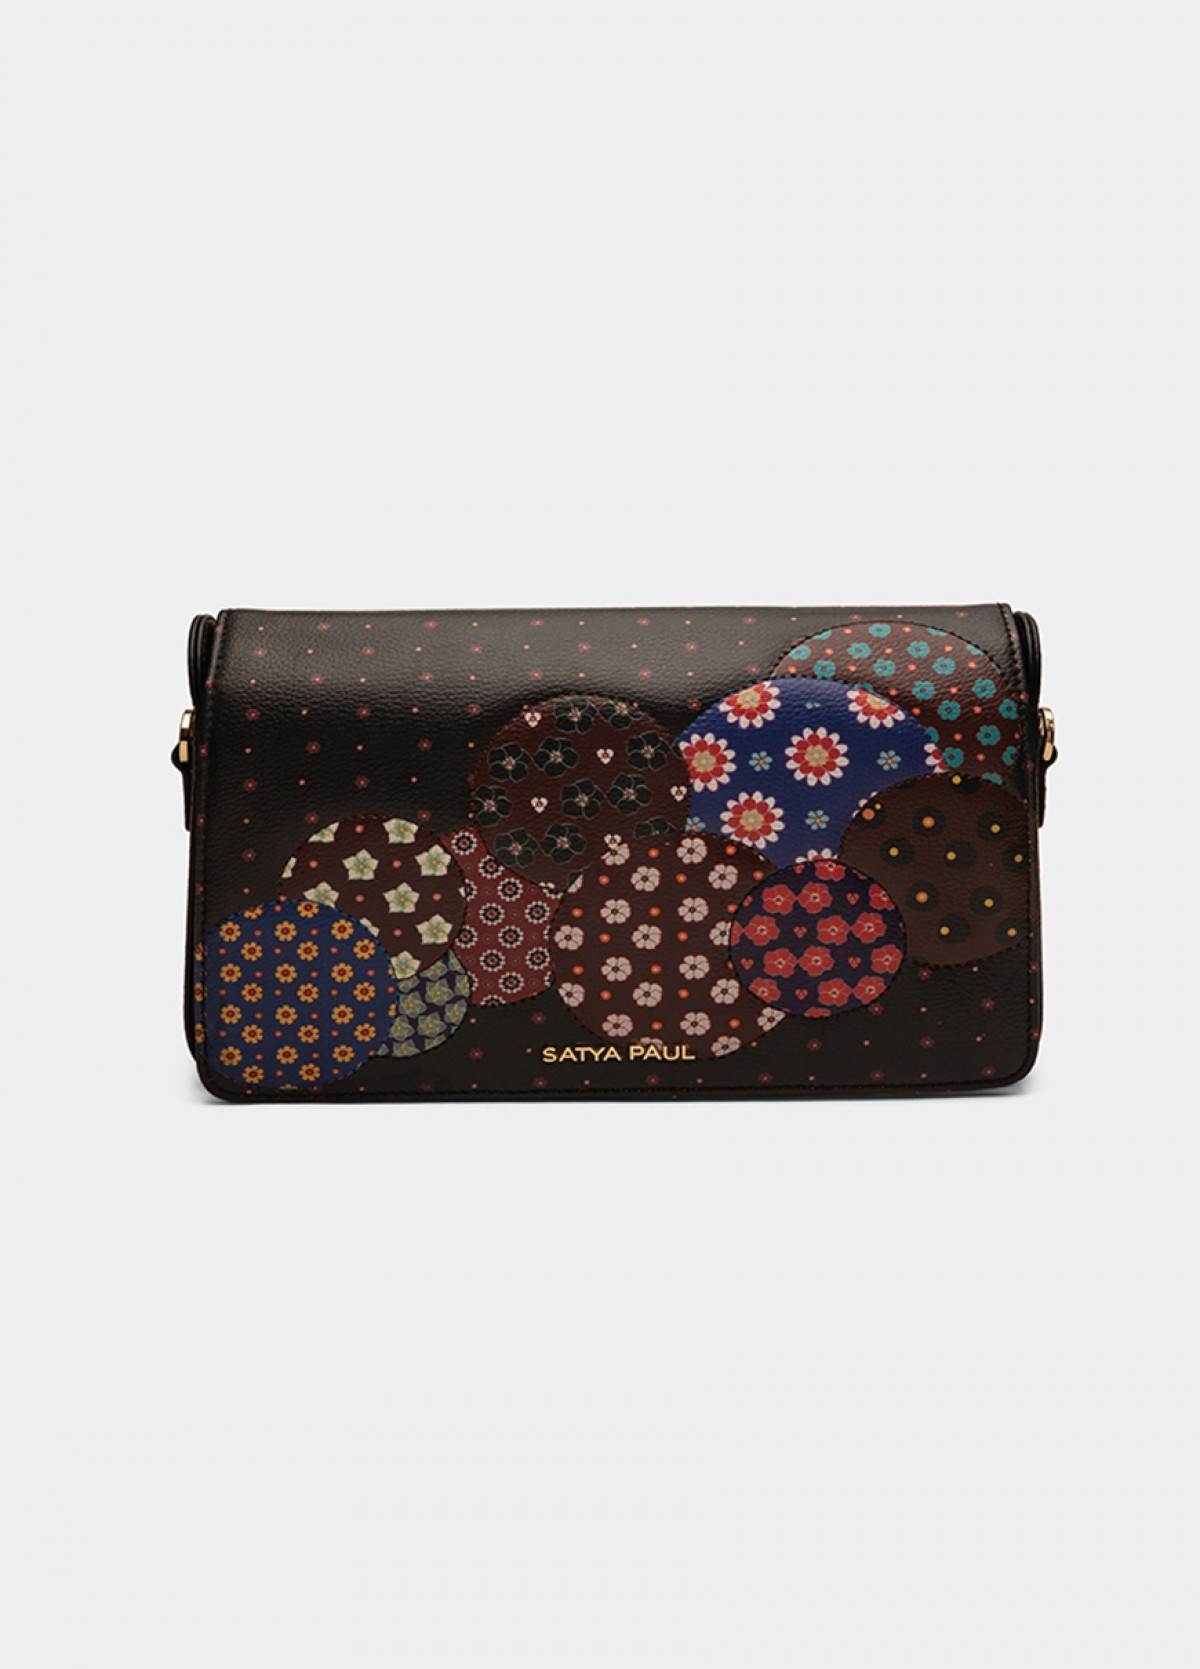 The Valley of Flowers Sling Bag